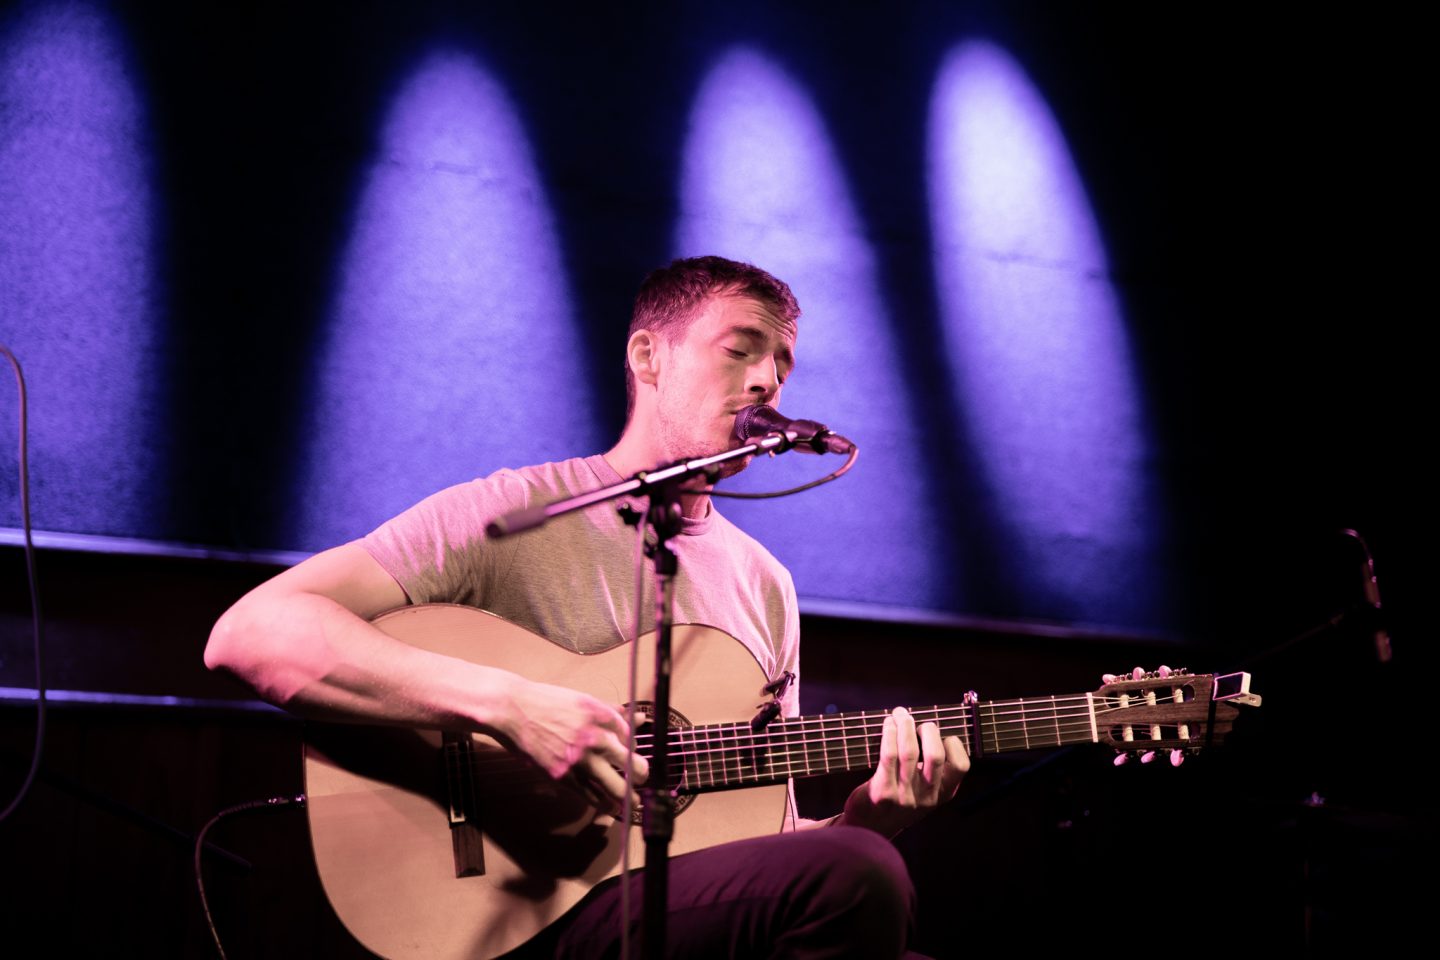 Charlie Cunningham at Schubas by Liina Raud Photography